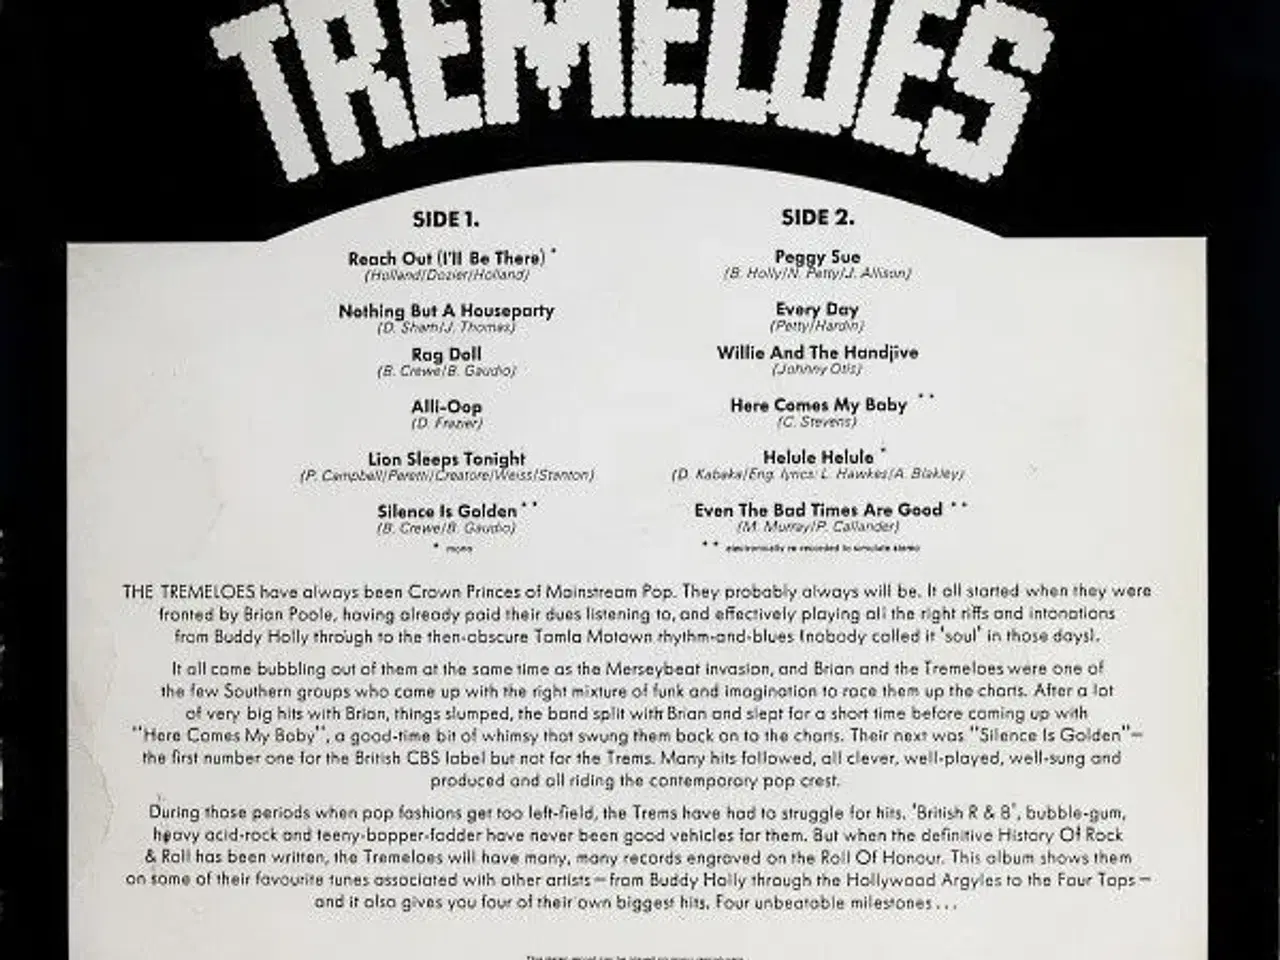 Billede 3 - Tremeloes - Reach Out For The Tremeloes